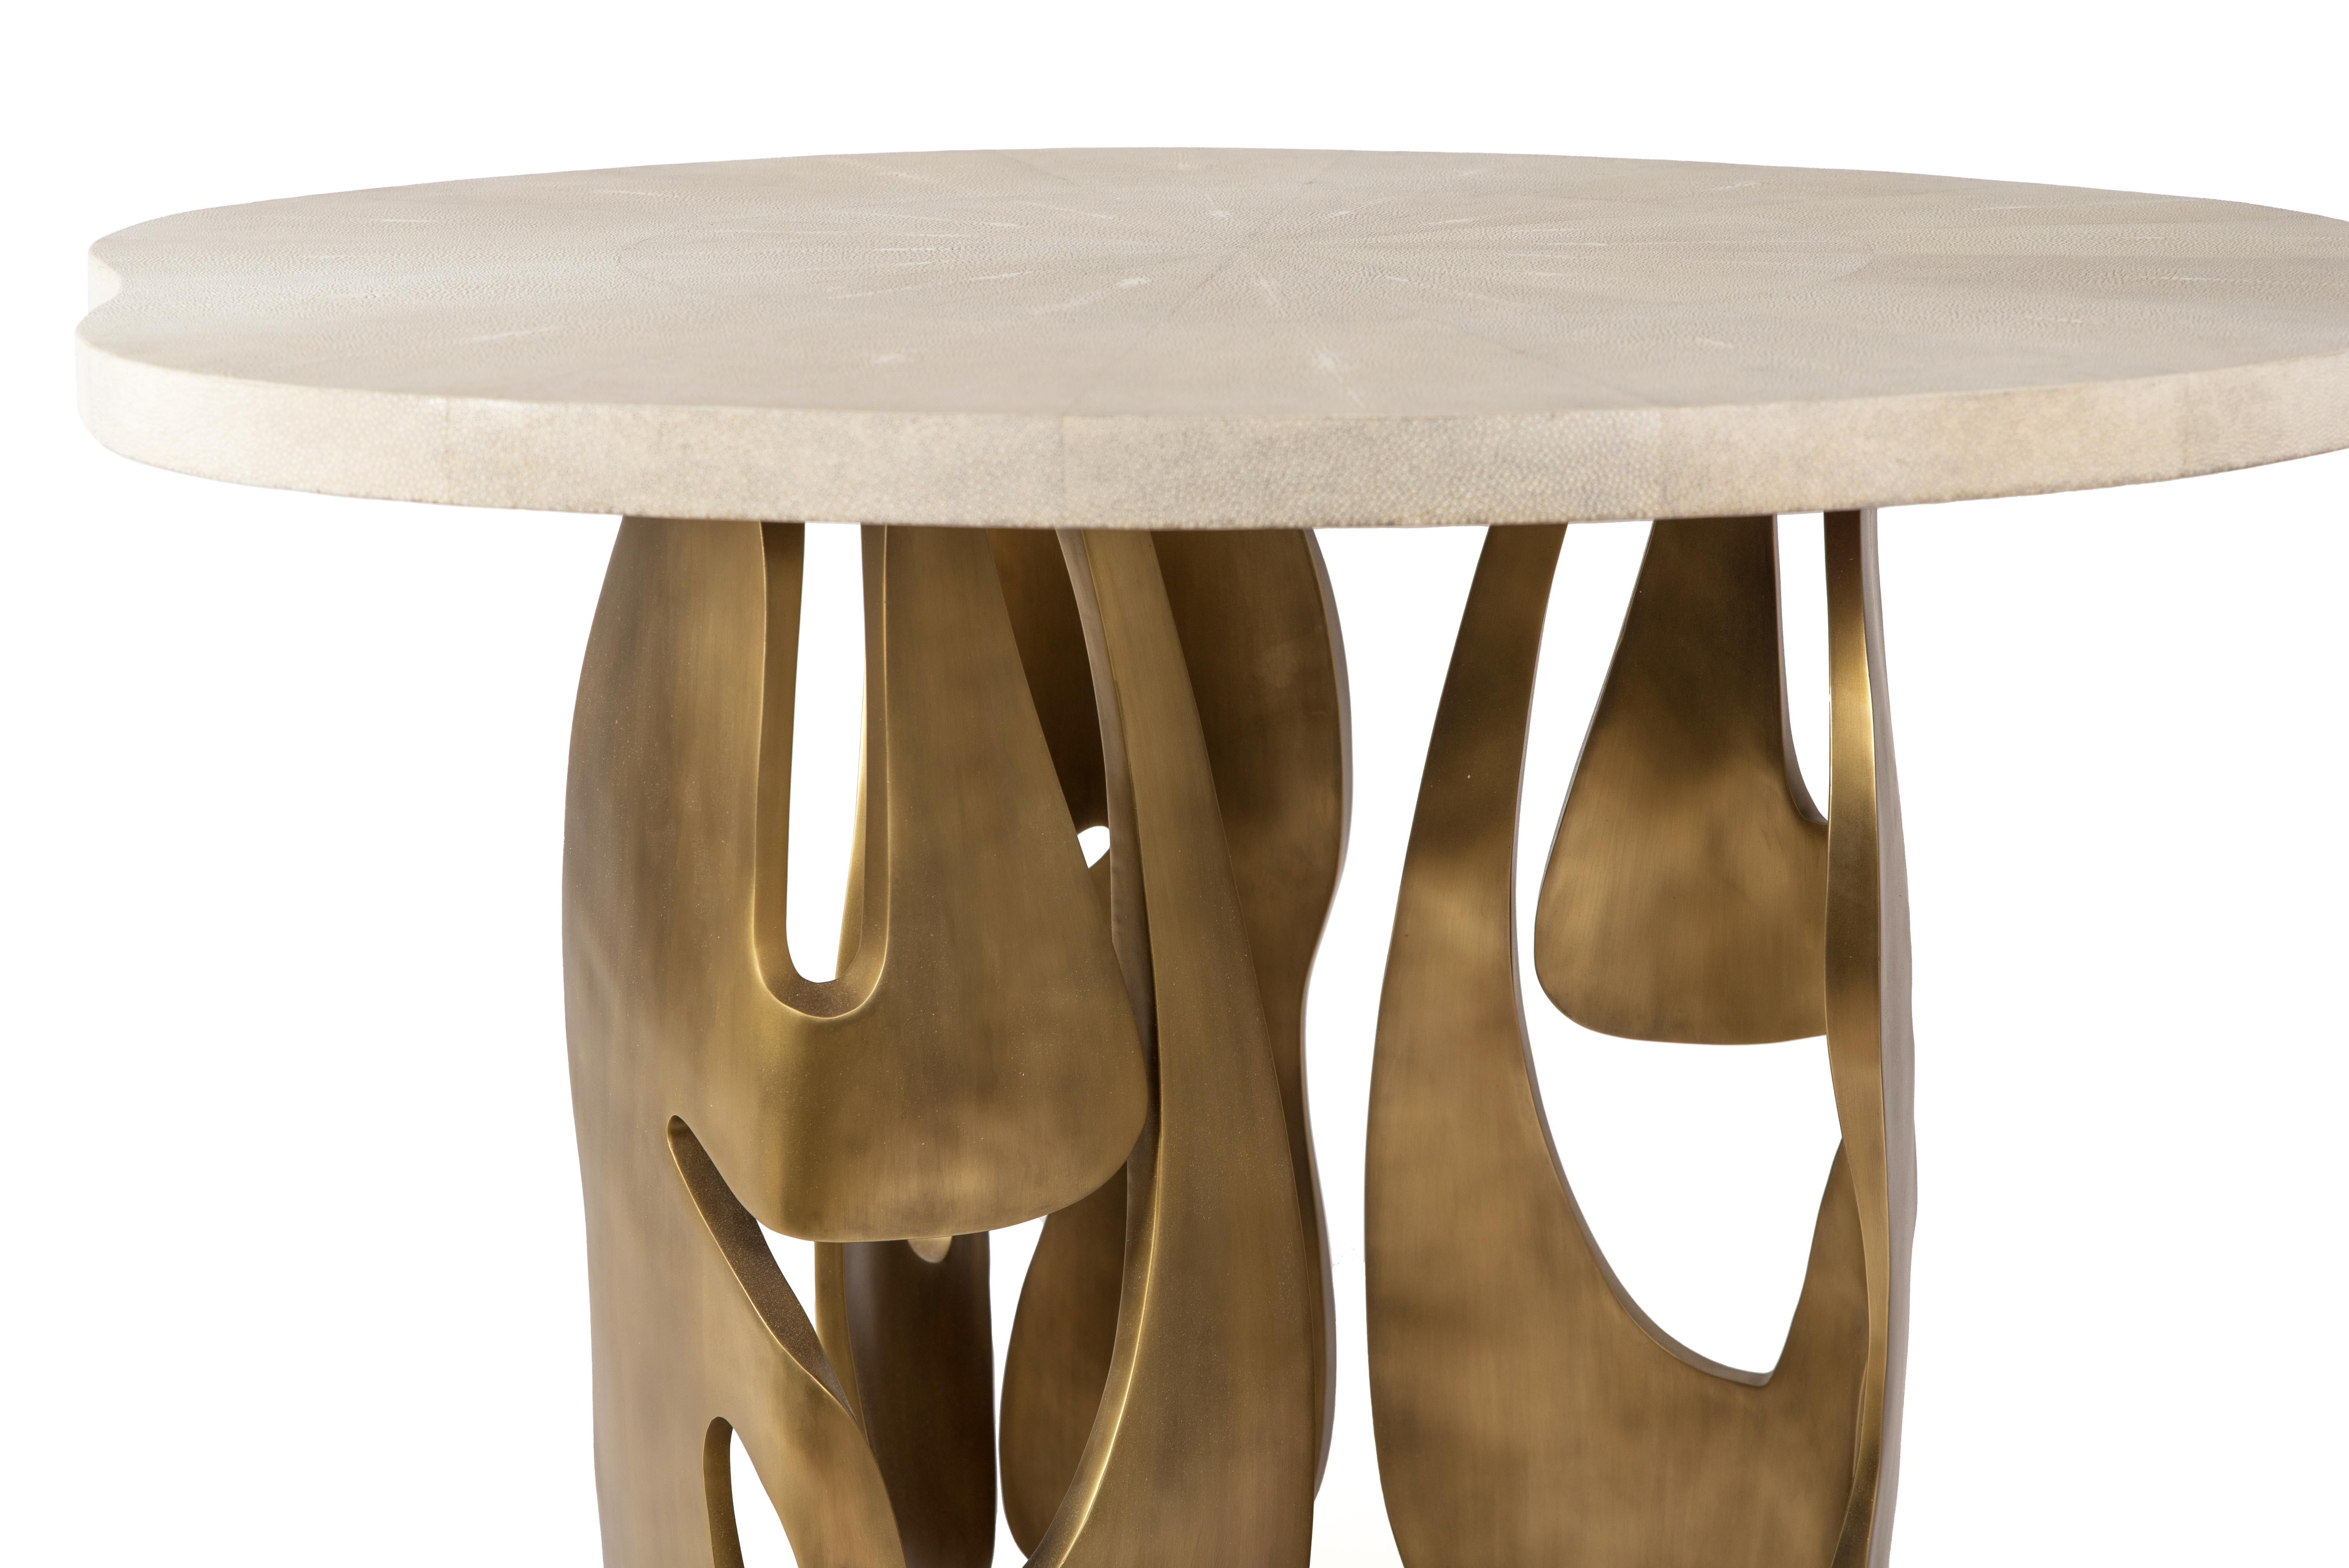 The Metropolis II breakfast table by R&Y Augousti is a statement piece. The amorphous-shaped cream shagreen inlaid top sits on a cluster of dramatic sculptural bronze-patina brass legs, showcasing the brand's incredible artisanal work. View the